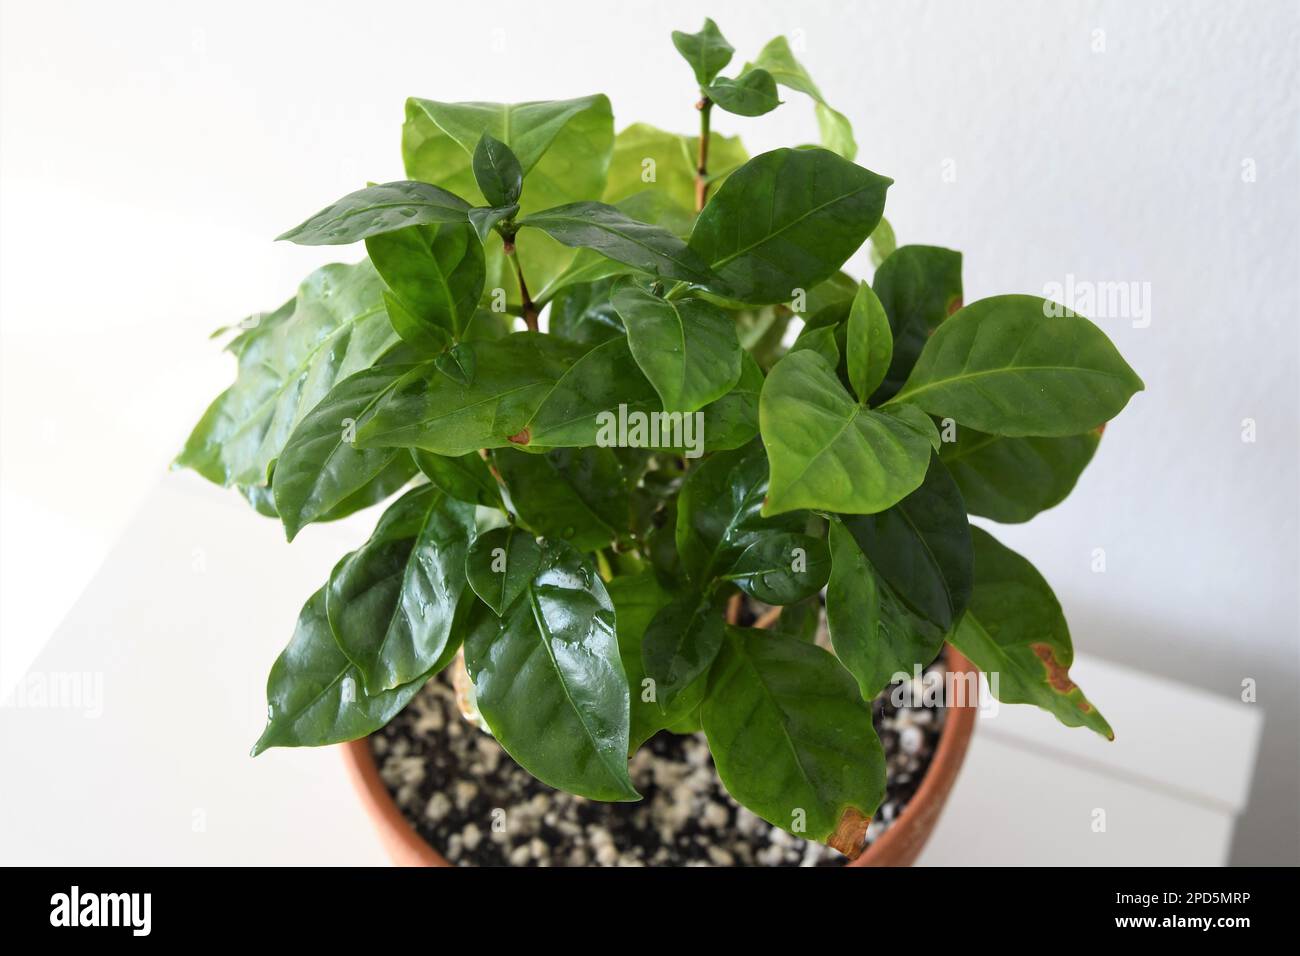 Coffee plant, Coffea arabica, in a terracotta pot, isolated on a white background. Houseplant with green leaves. Landscape orientation. Stock Photo